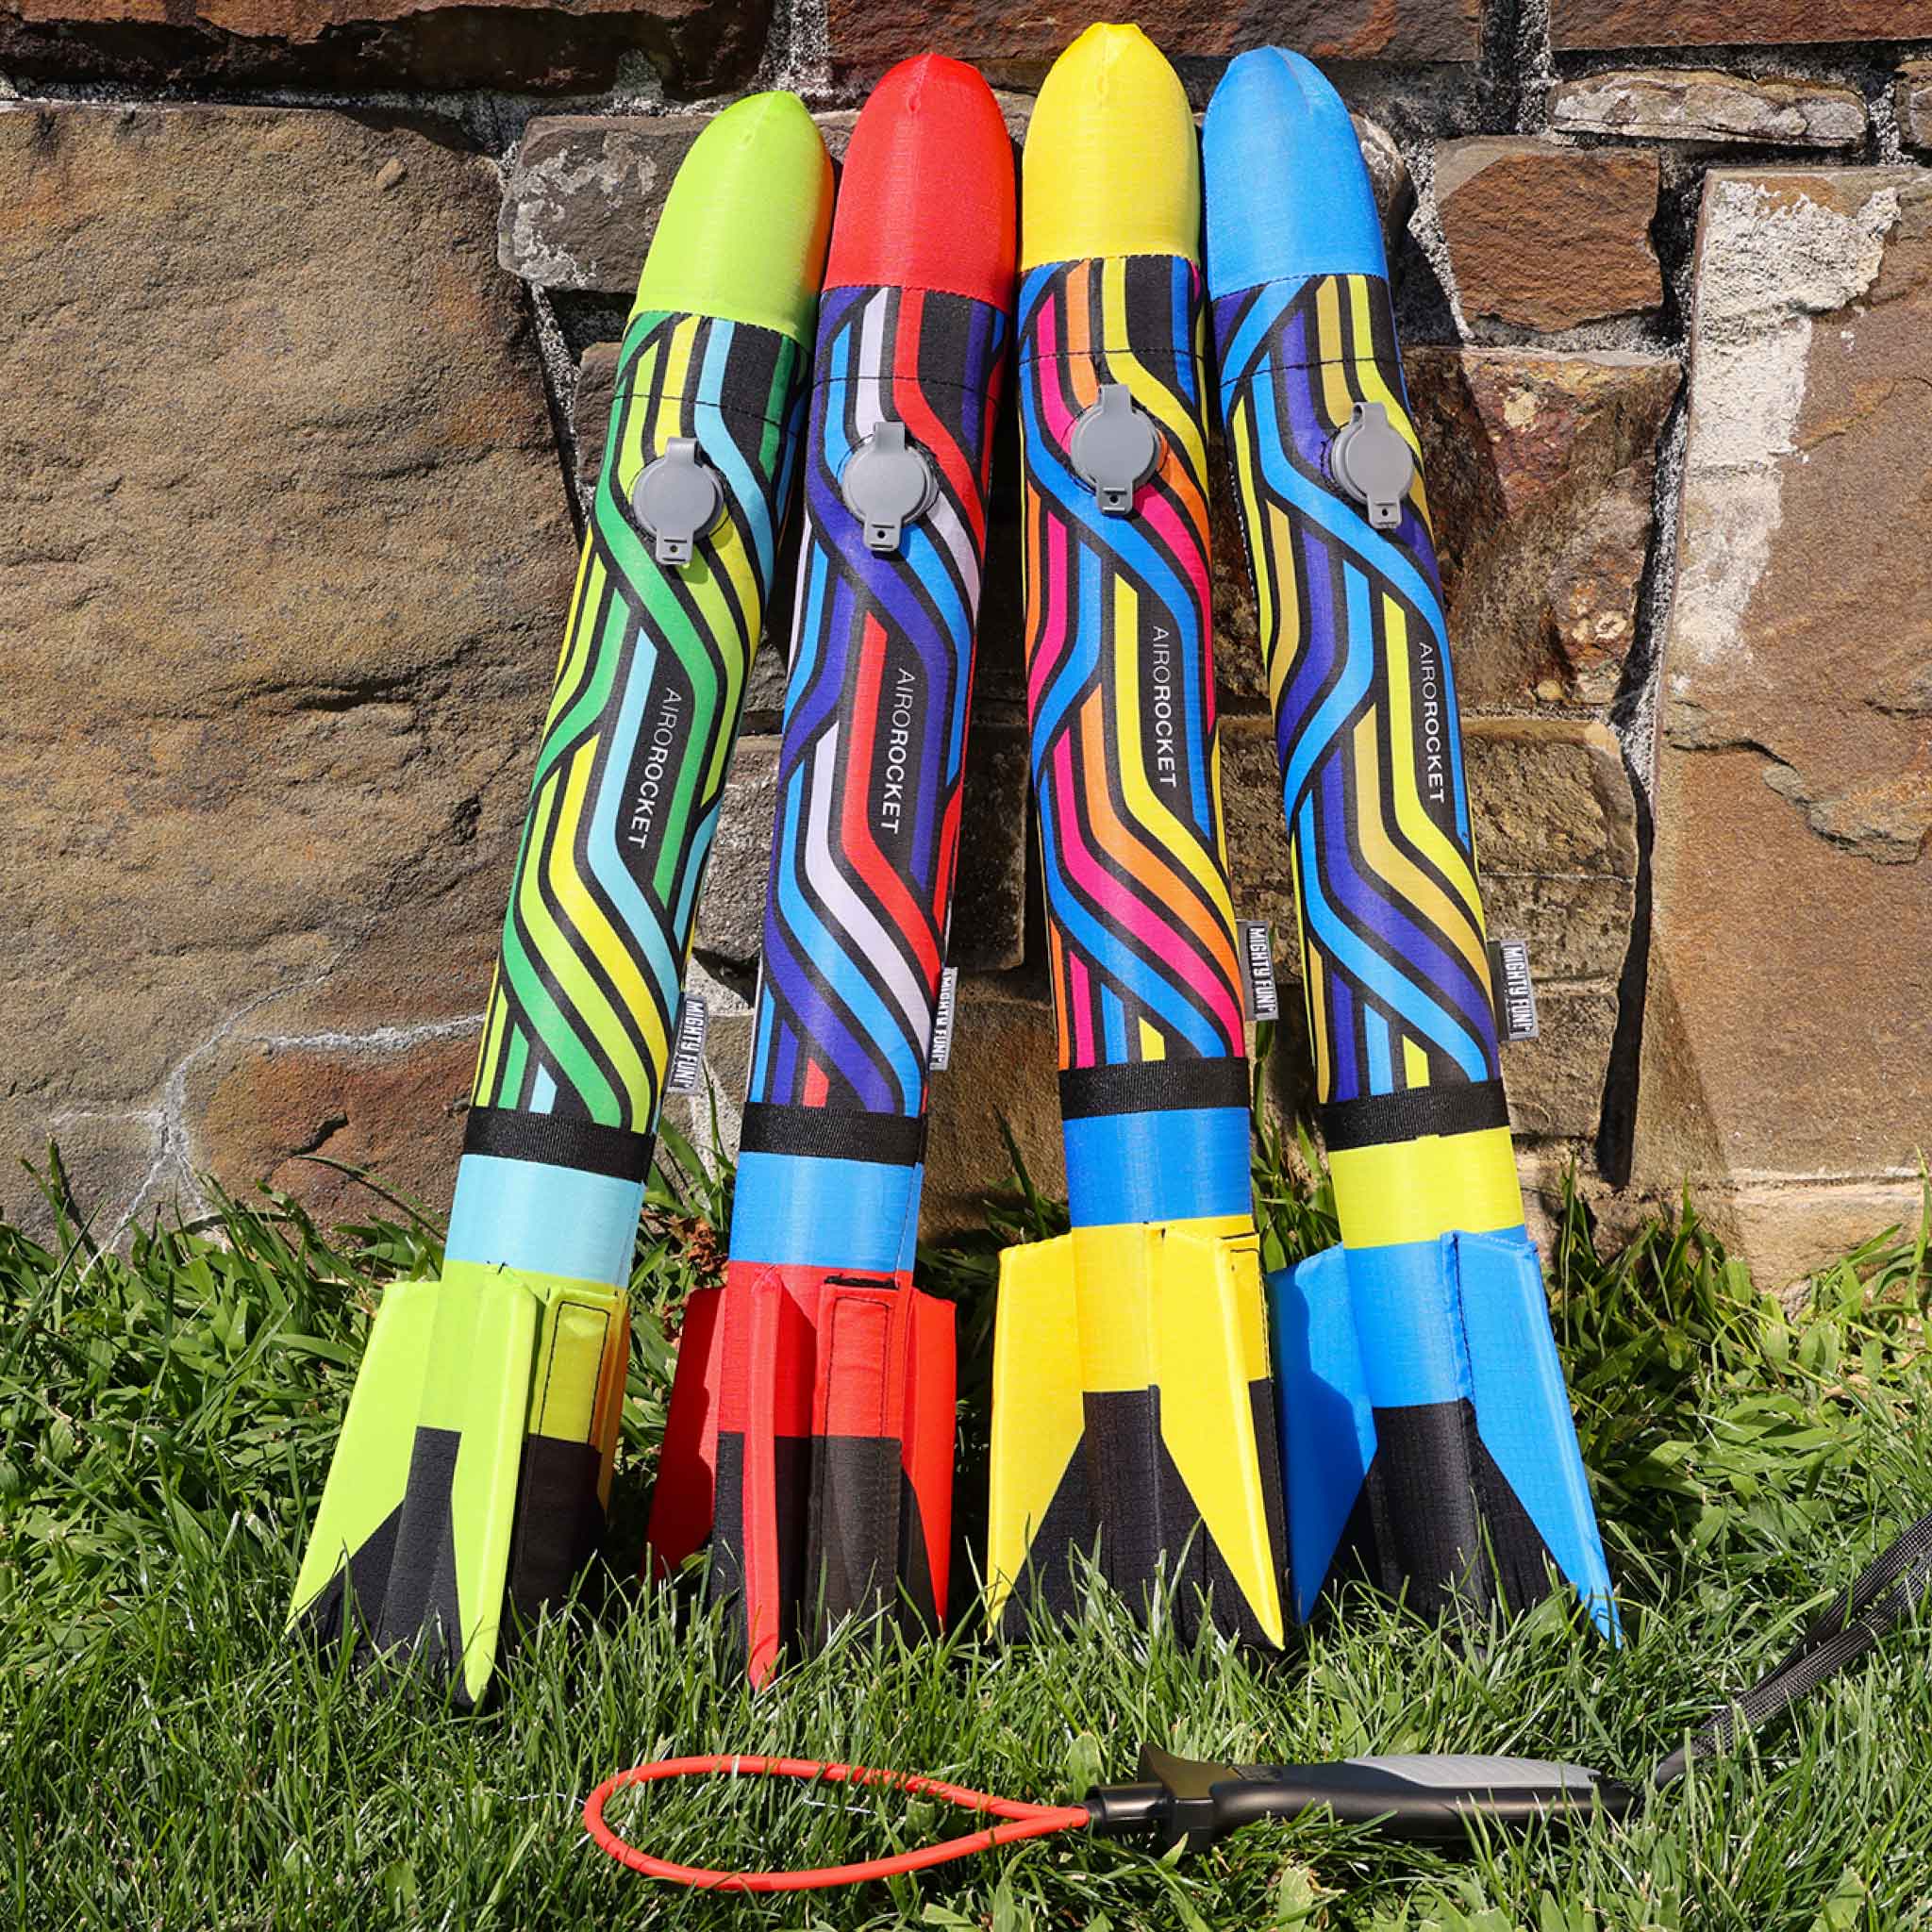 Airo Rocket toy rocket in all 4 colors: red, lime, yellow and blue outside by Mighty Fun!